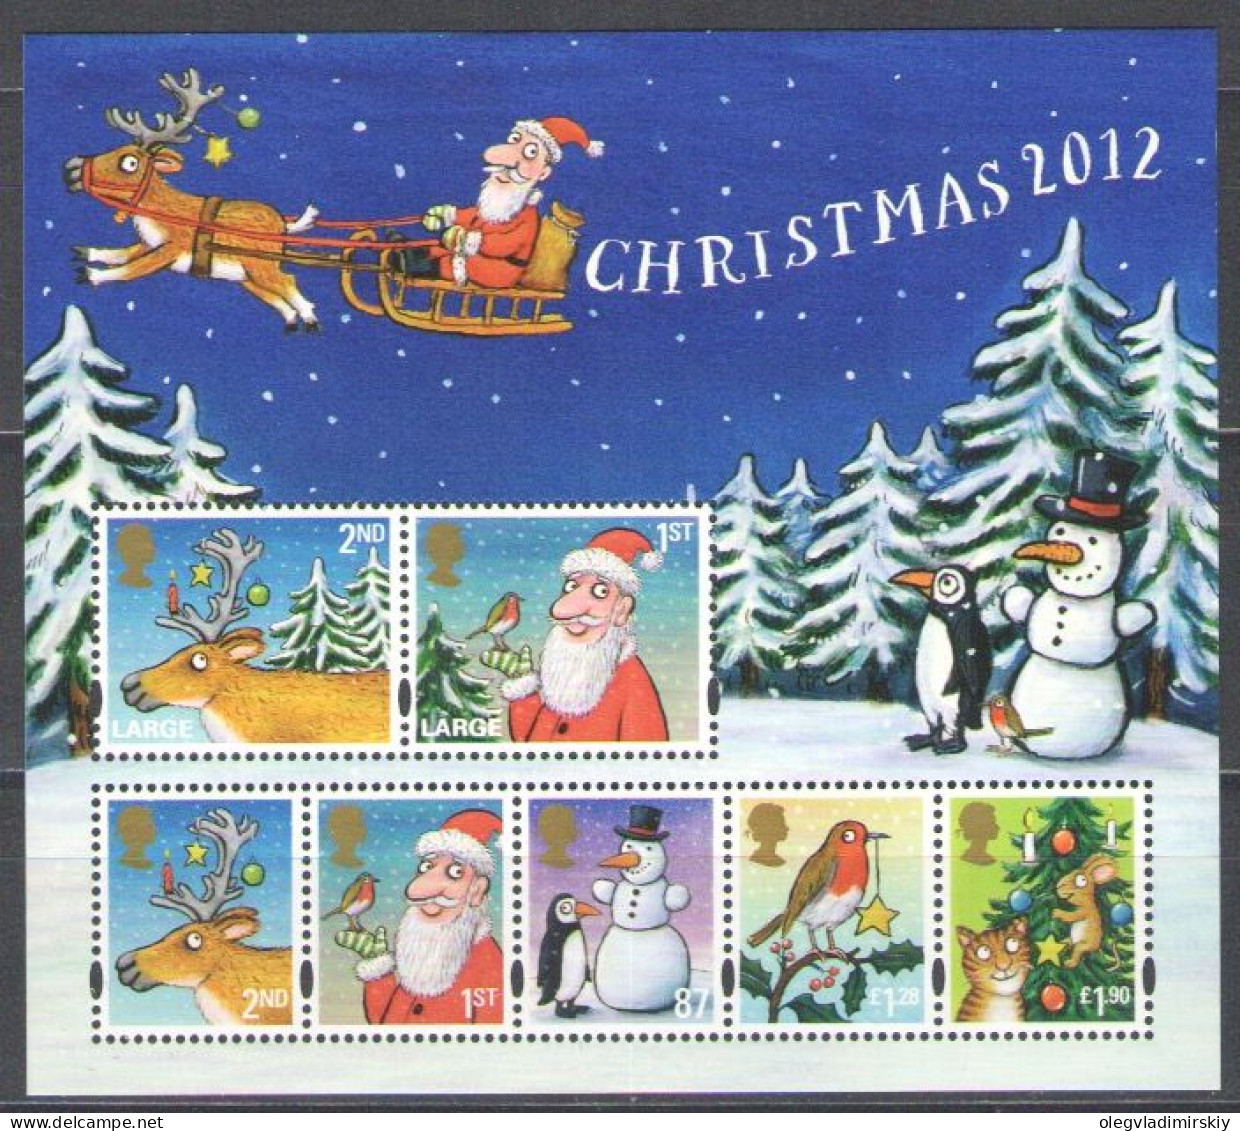 Great Britain United Kingdom 2012 Christmas Set Of 7 Classic Stamps In Block MNH - Blocks & Miniature Sheets